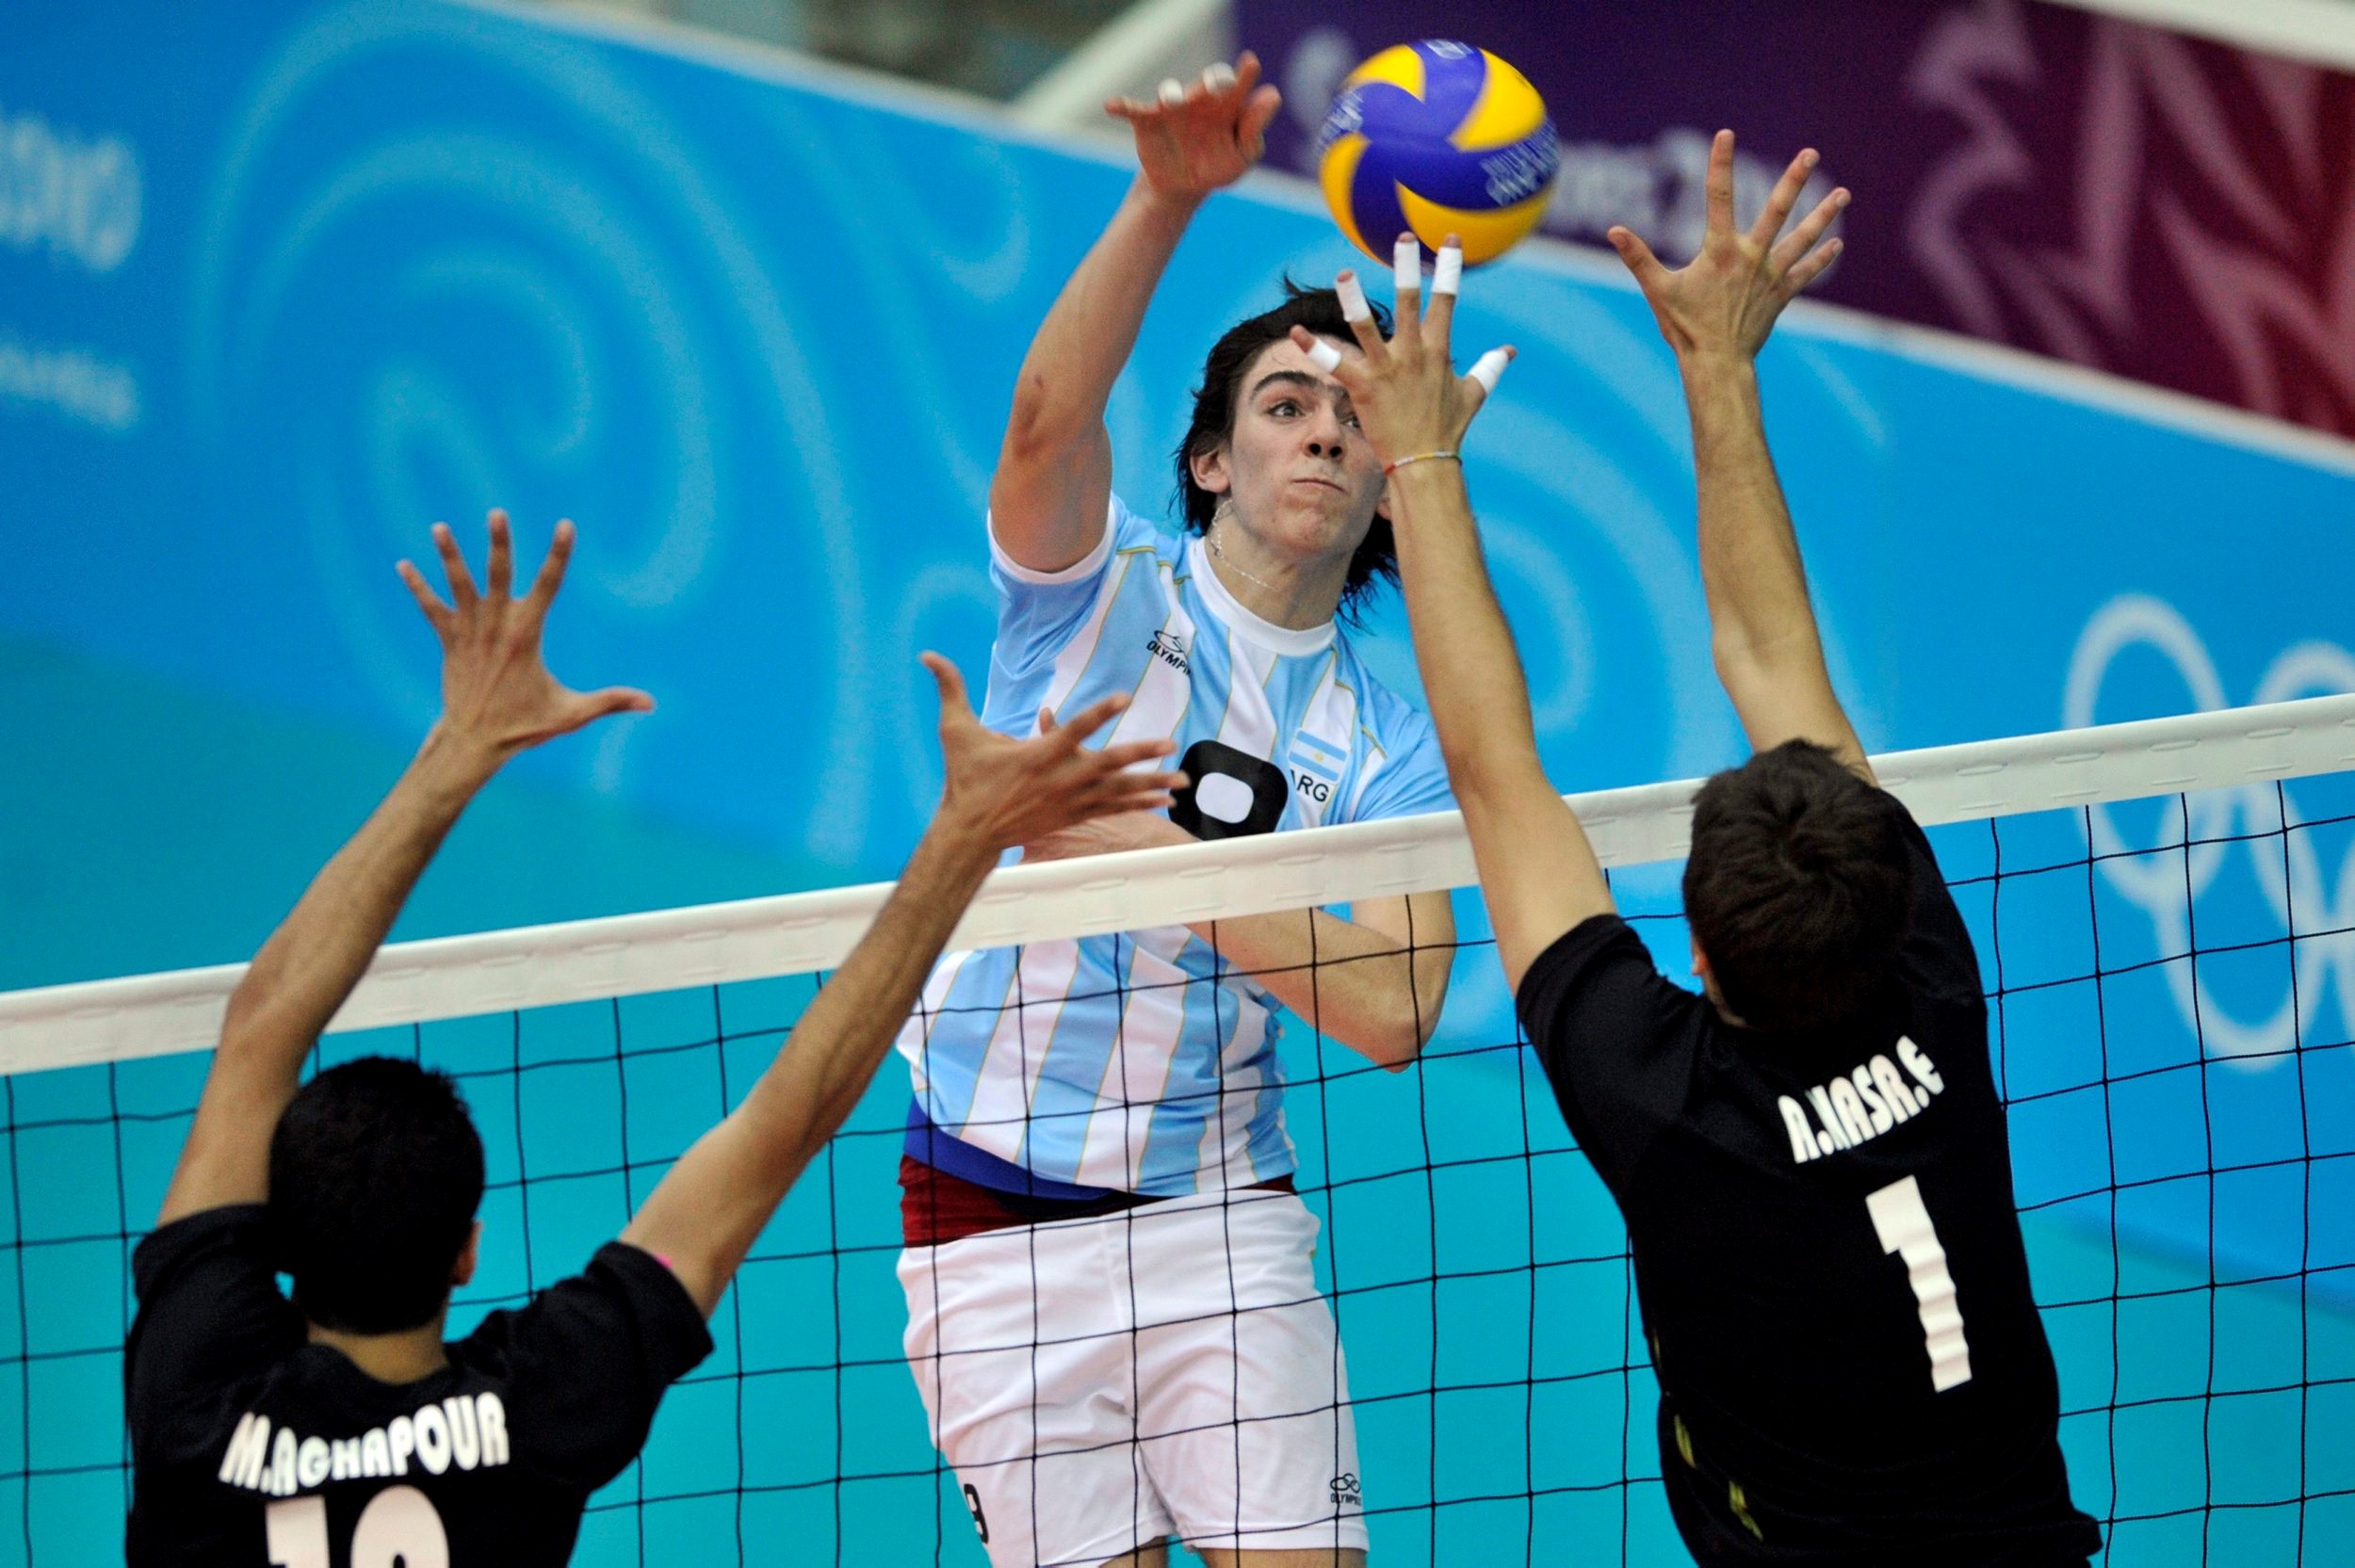 Man Volleyball Match in Olympics Wallpapers | HD Wallpapers